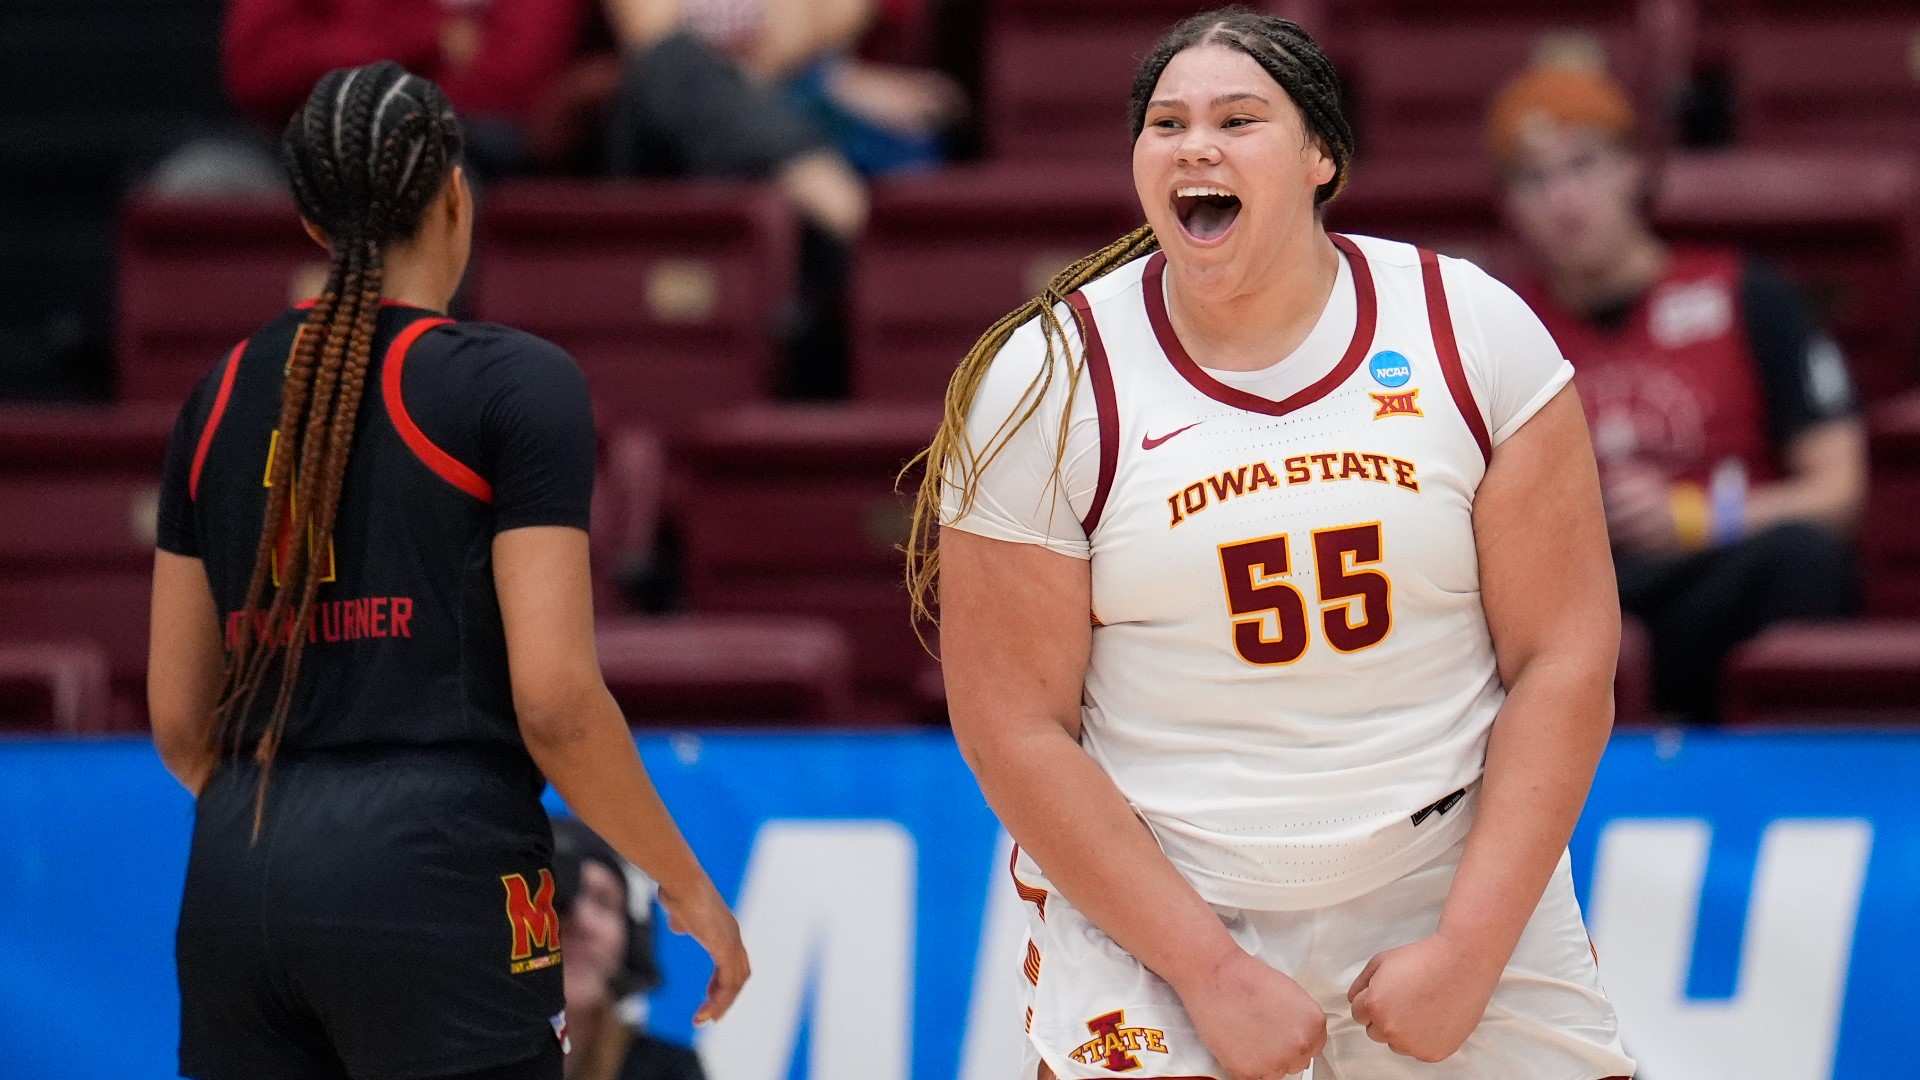 To put a bow on a memorable season, Local 5 Sports' Jake Brend shared his top five women's basketball moments in Iowa this year.